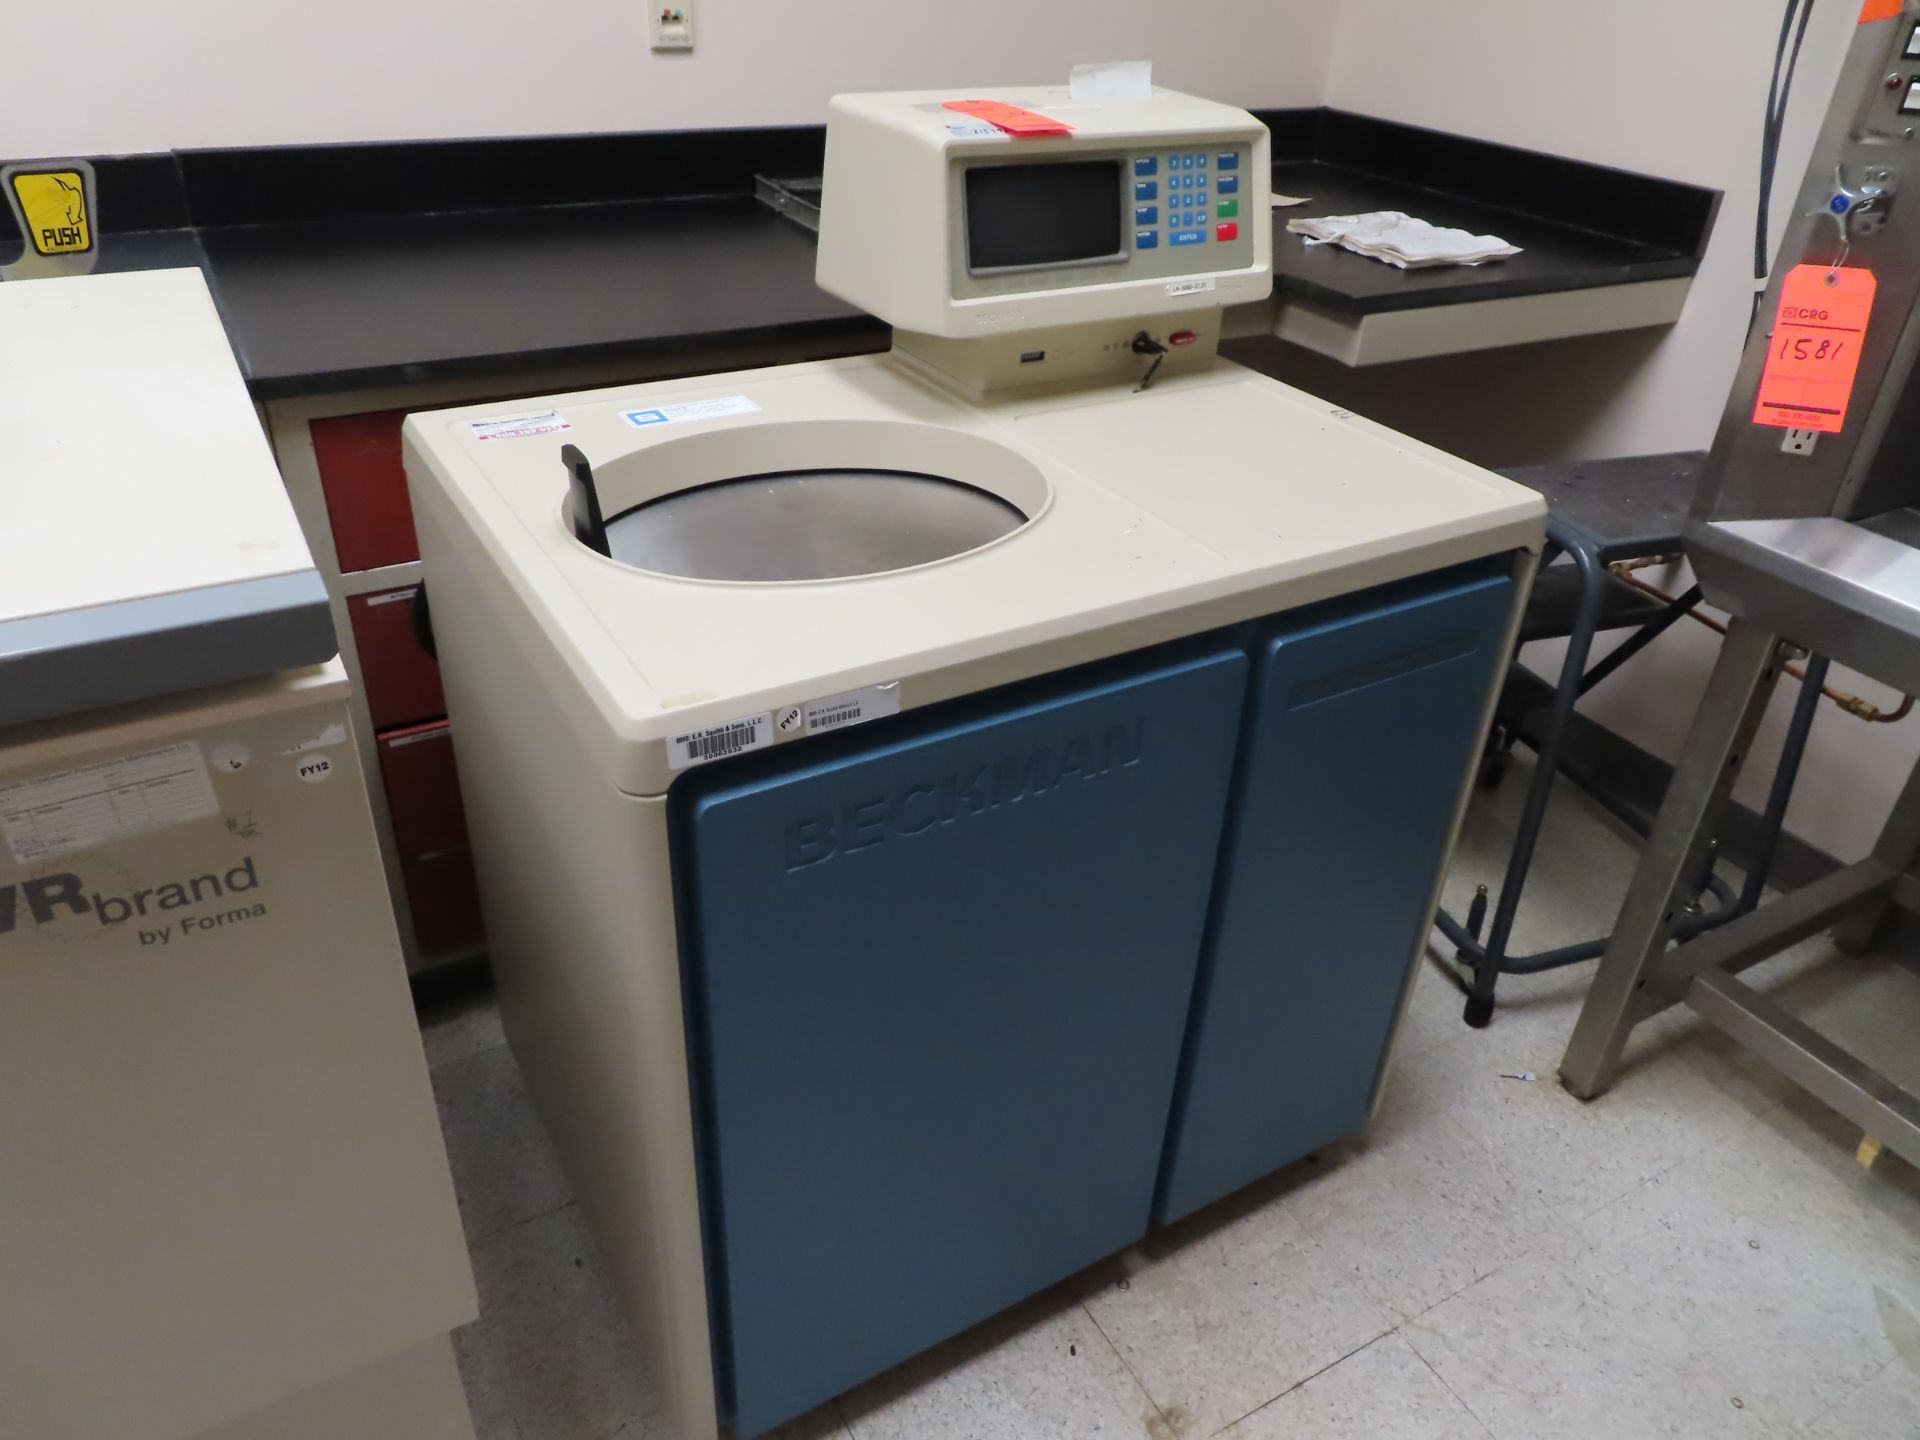 Beckman XL90 Ultra centrifuge, s/n 215792, located wing A, 3rd floor, room 309D